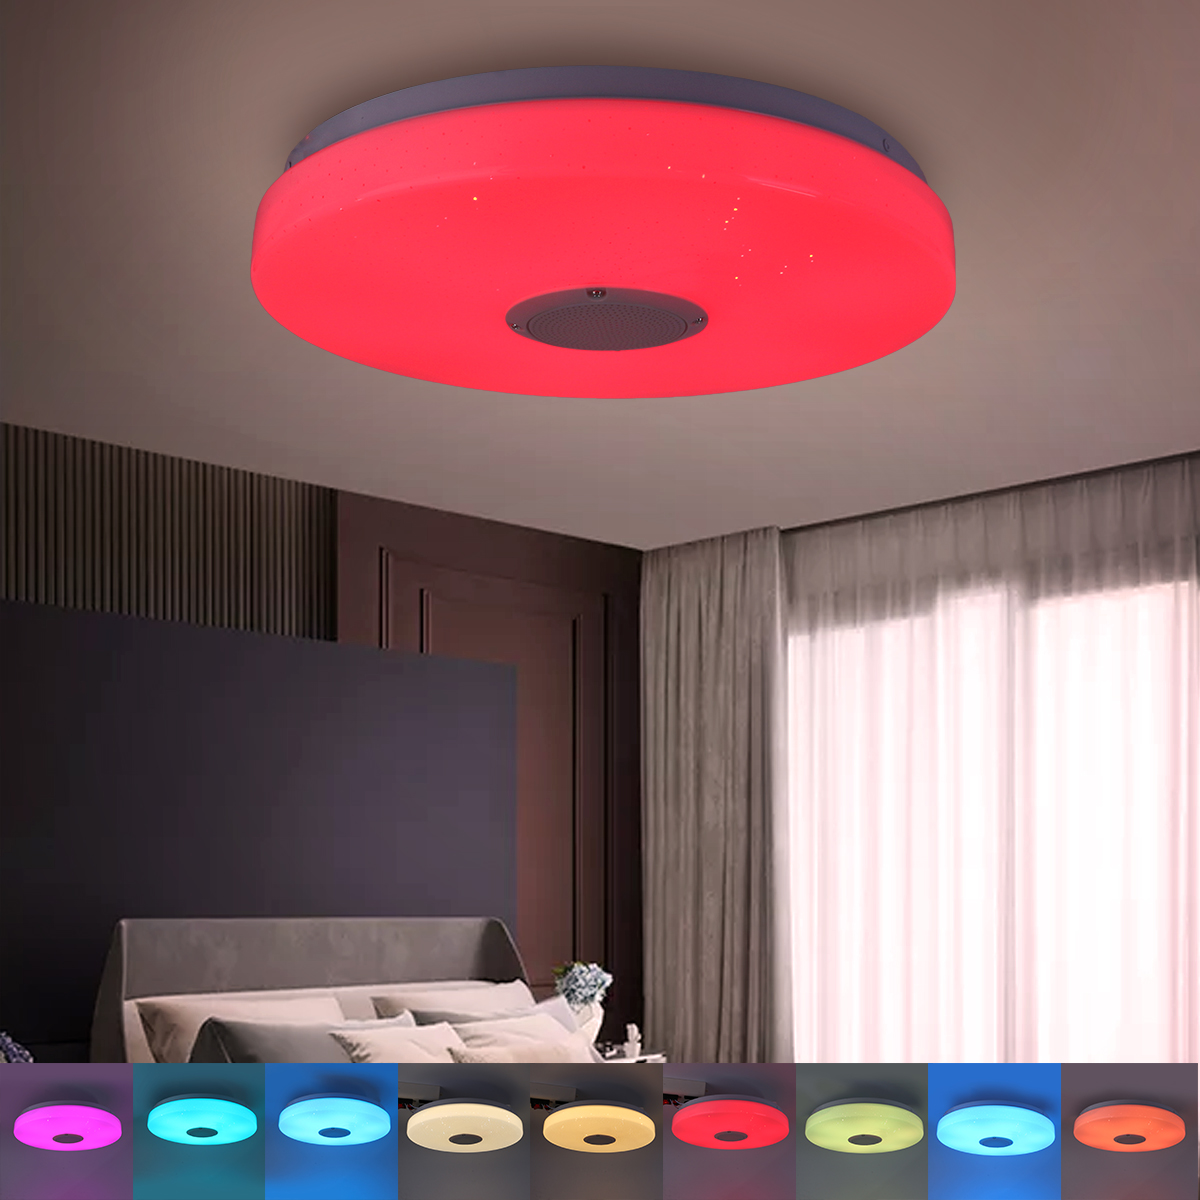 33cm-LED-Ceiling-Lights-Colorful-DownLight-Lamp-Smart-Control-bluetooth-WIFI-APP-Home-1722354-2